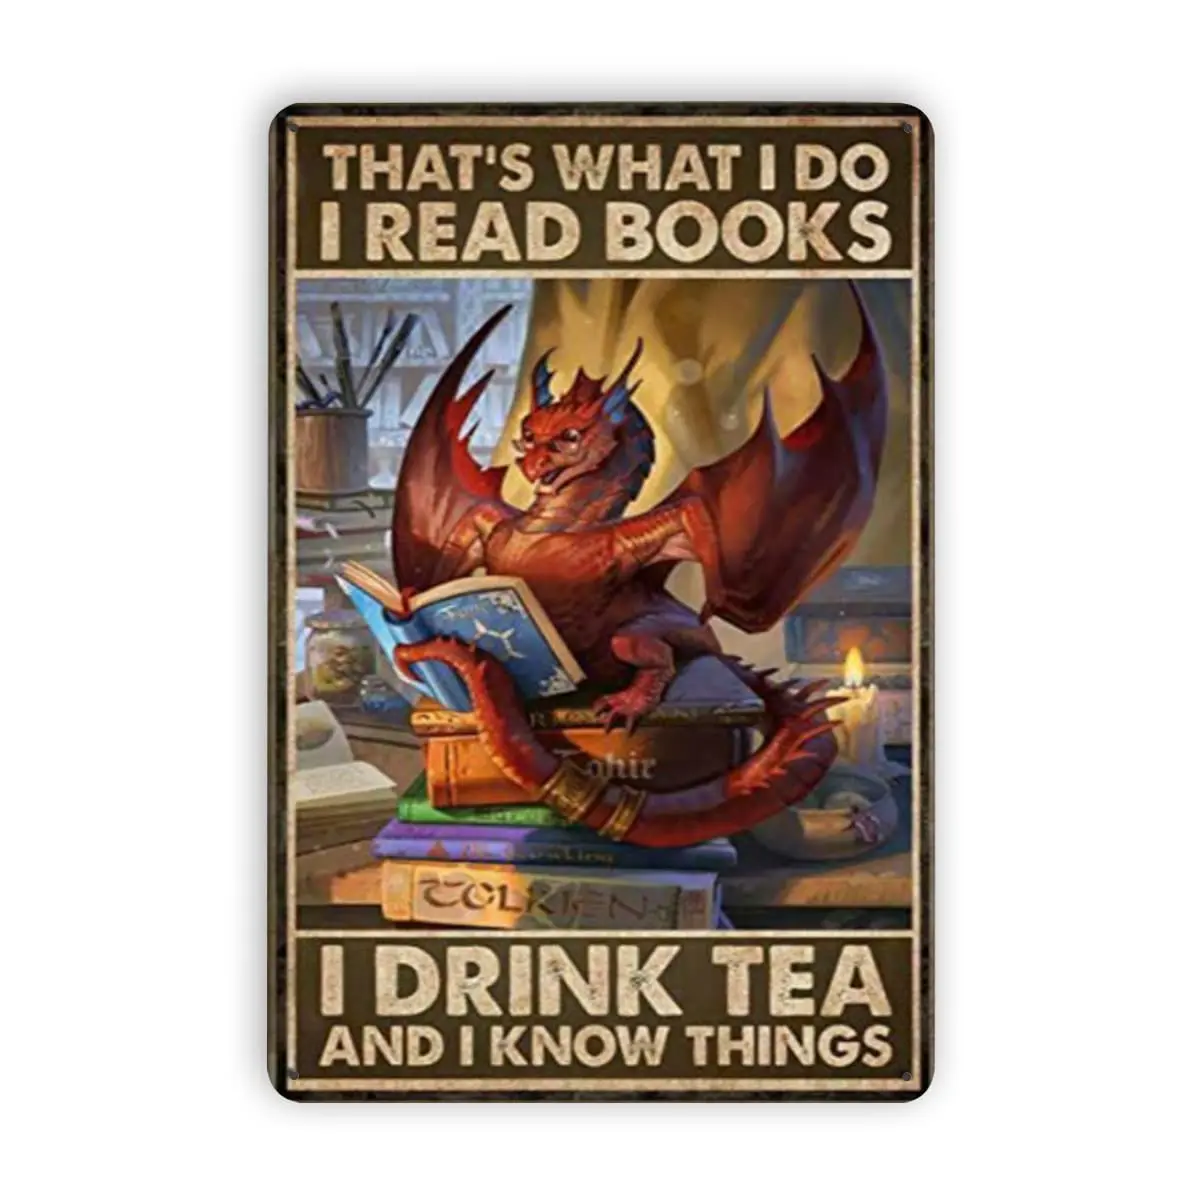 

Dragon That's What I Do I Read Books I Drink Tea And I Know Things Metal Sign 8 X 12 Inch